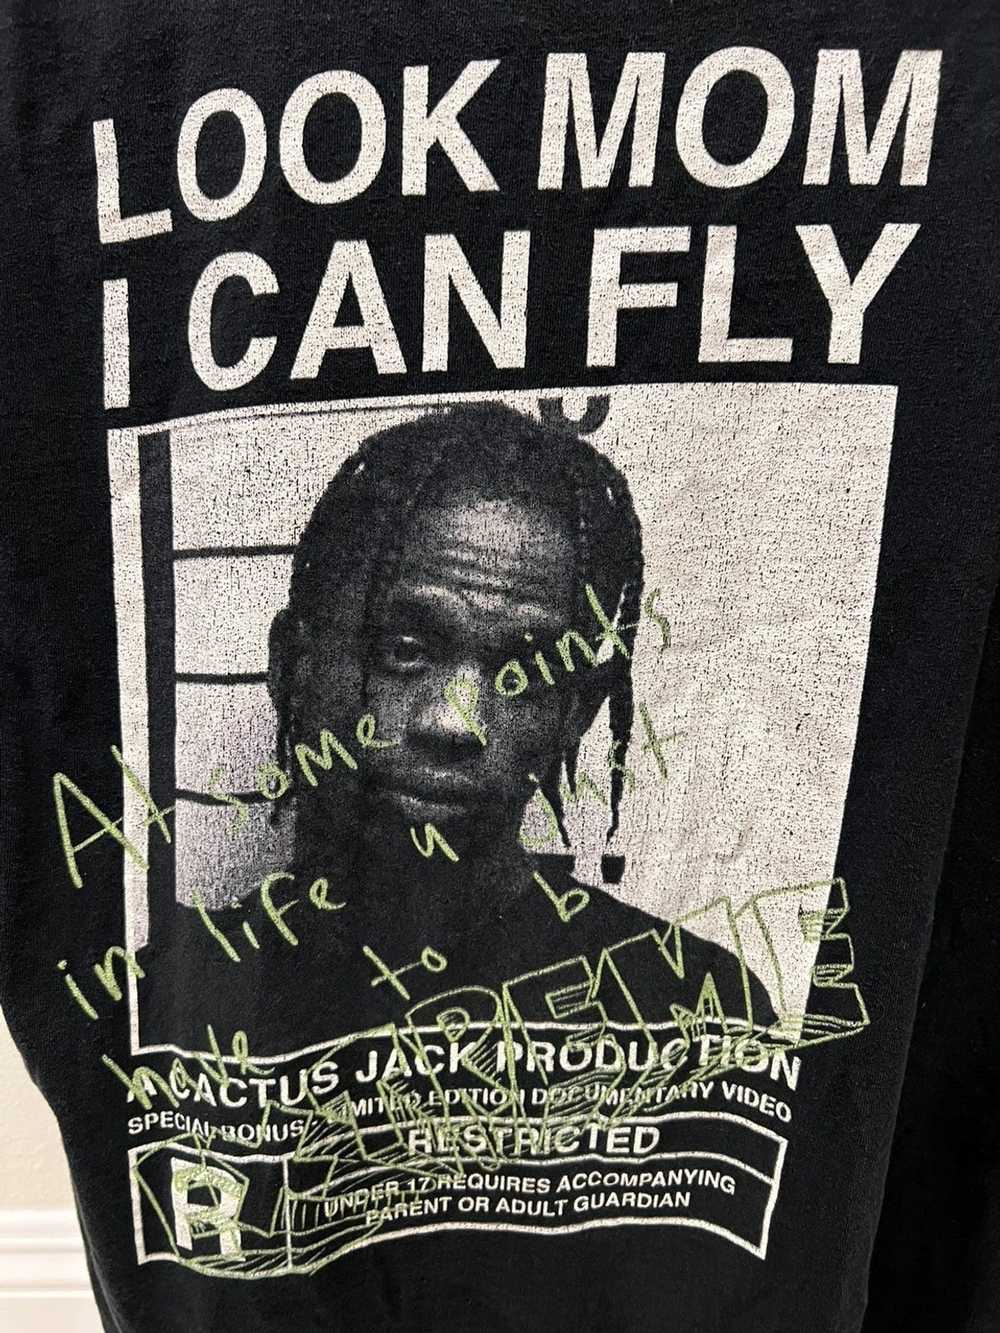 Travis Scott - Look Mom I Can Fly movie poster I made using